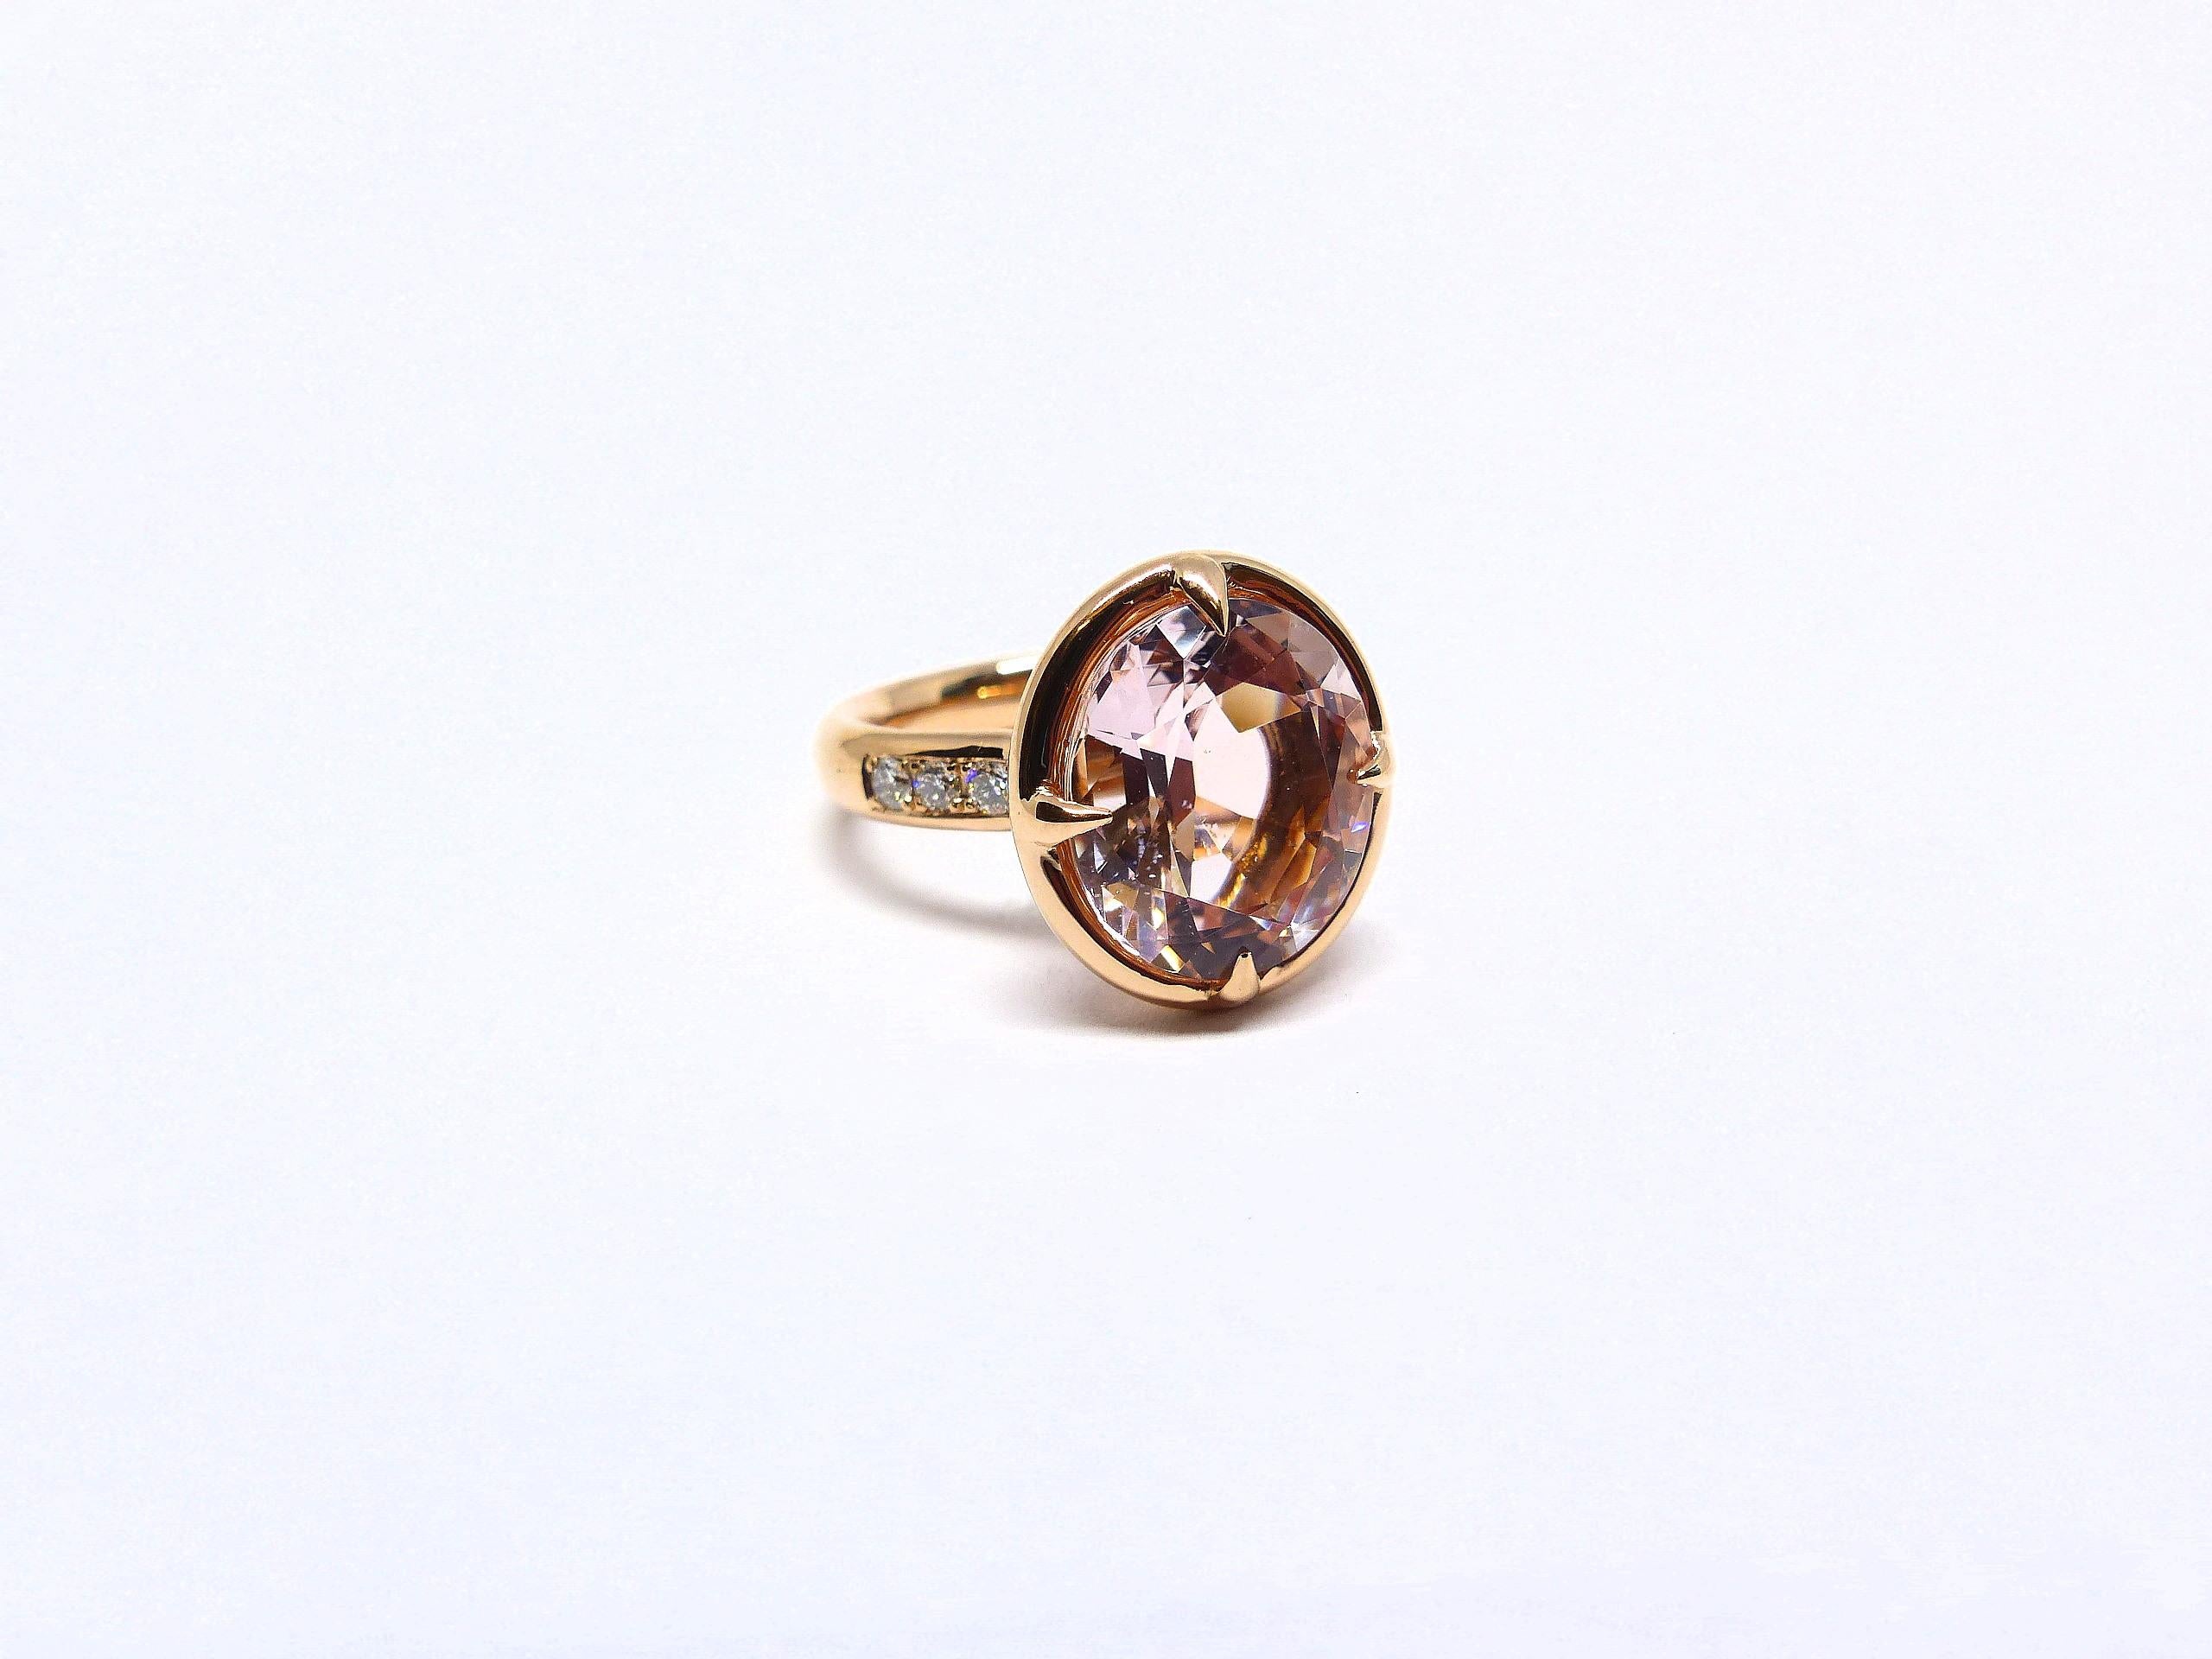 18k Rose Gold Ring (10g) set with: 

1x fine Morganite in intensiv pink colour and large facettes (oval, 13x11mm, 5.98ct) 

10x Diamonds (brilliant-cut, 2mm, 0.31cts) 

Ringsize: 6 3/4. 